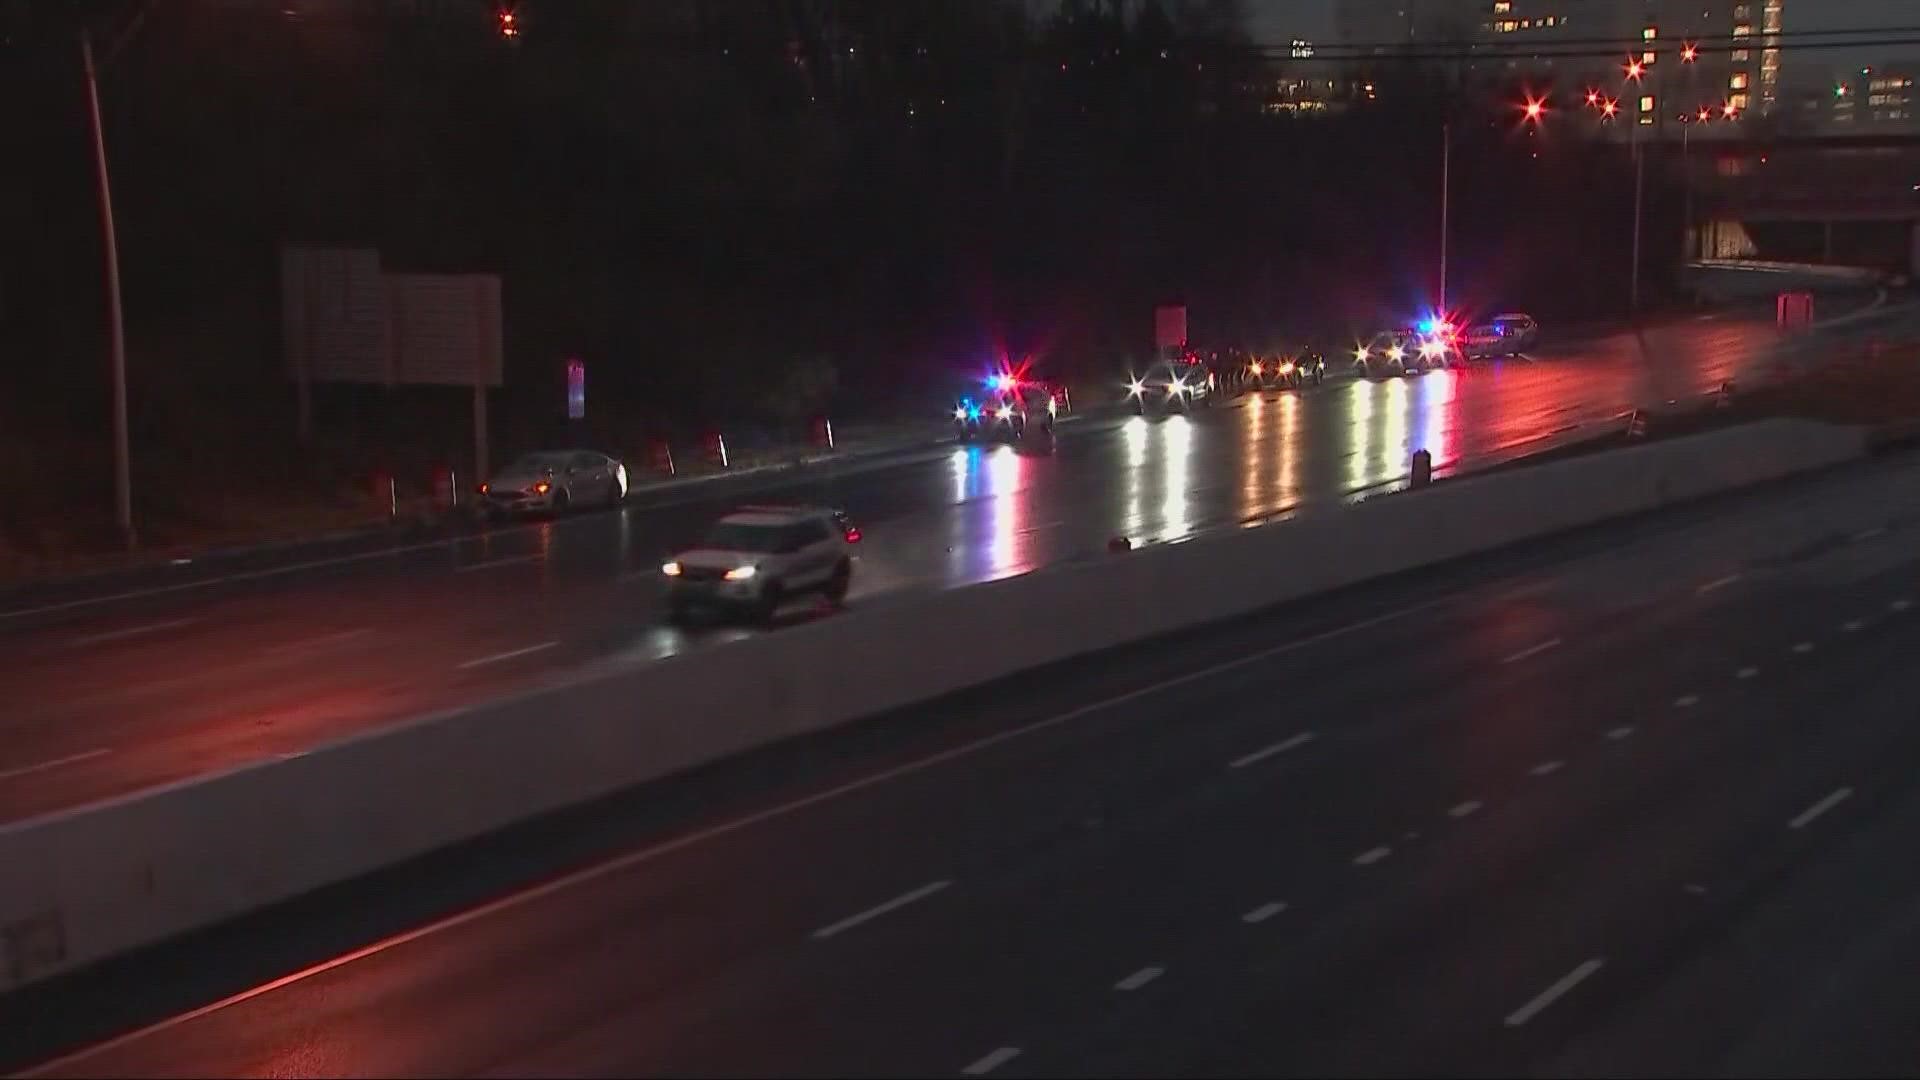 Police are still searching for a suspect who shot at an off-duty officer Friday morning while he was merging onto I-71, according to the Columbus Division of Police.